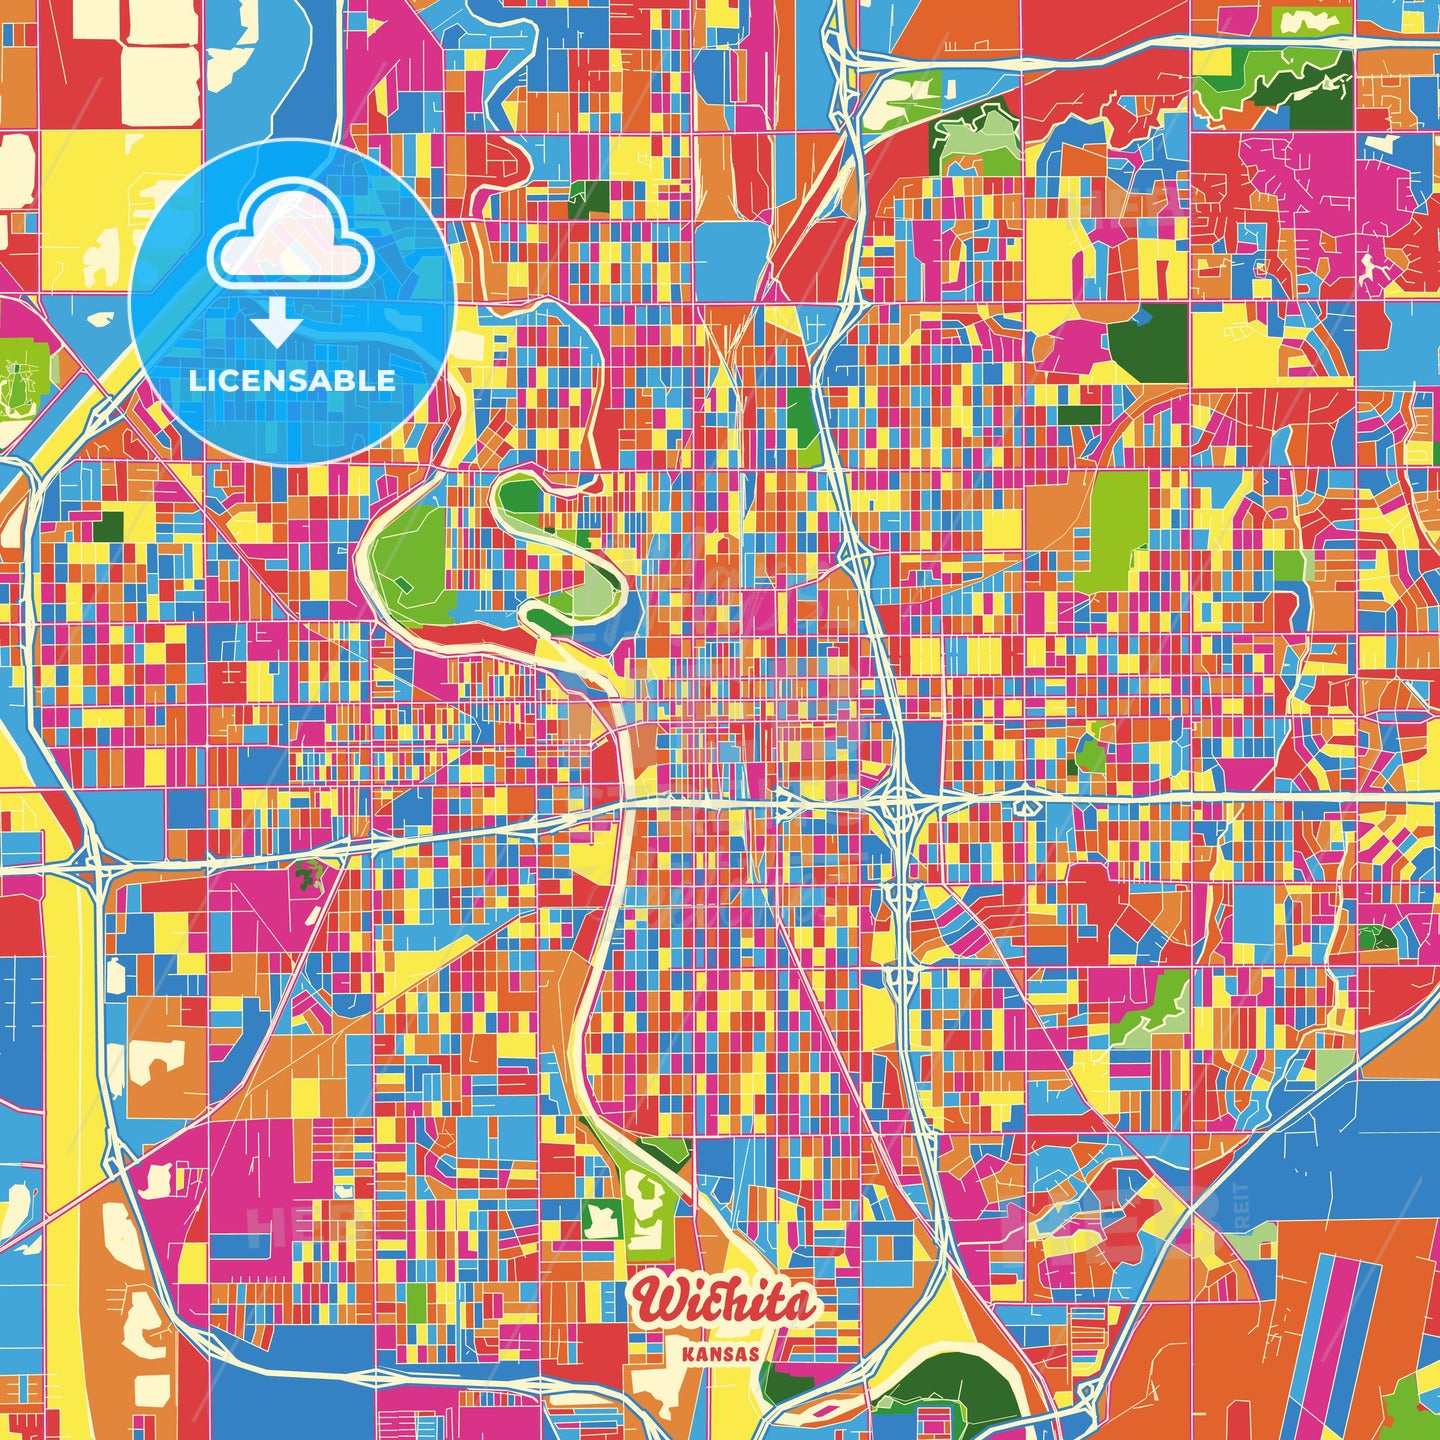 Wichita, United States Crazy Colorful Street Map Poster Template - HEBSTREITS Sketches